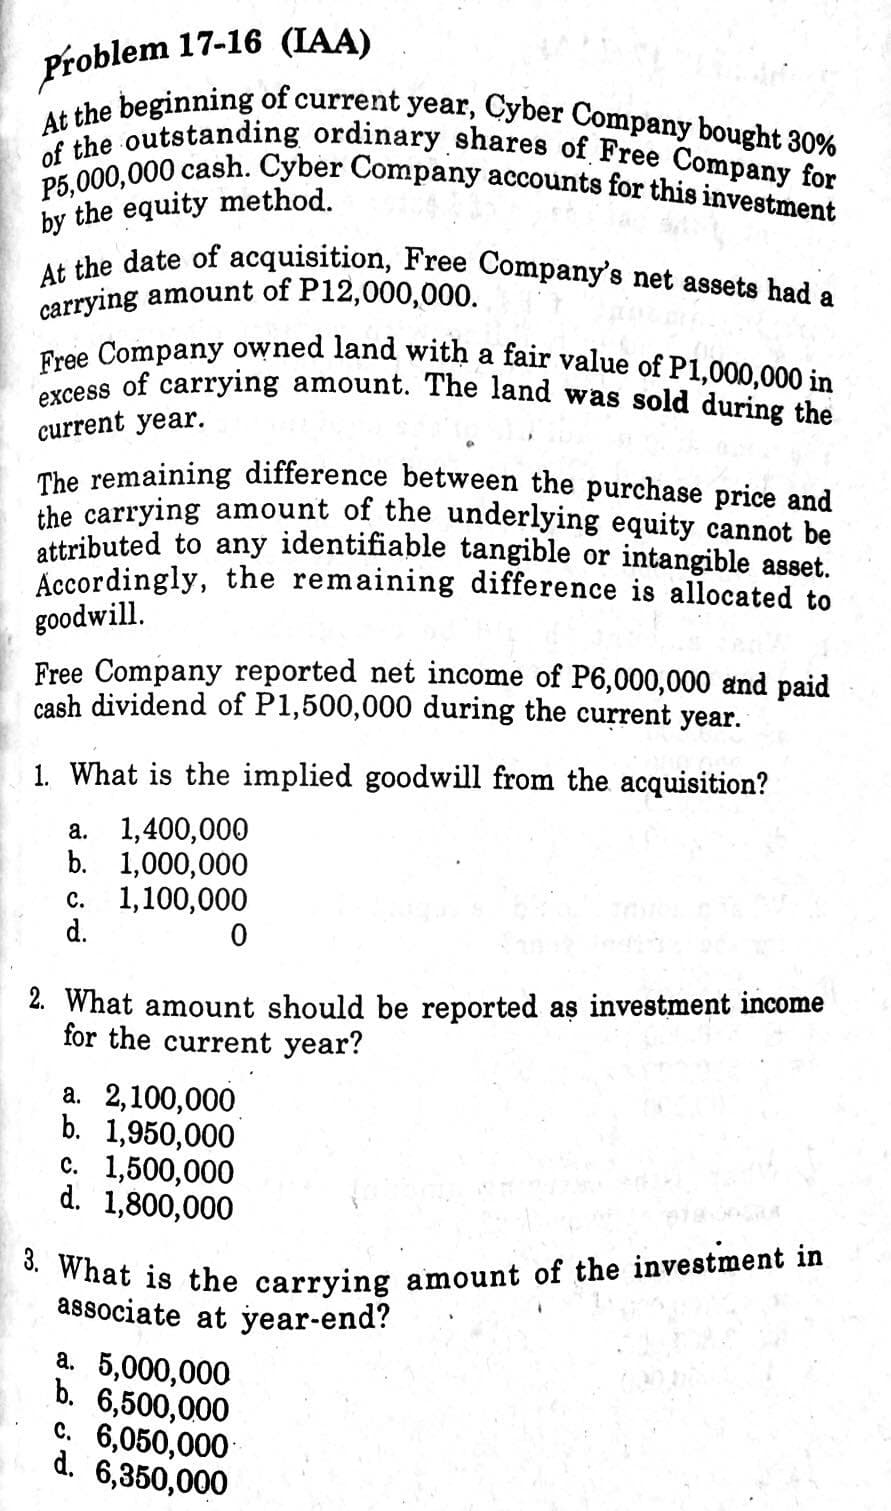 3. What is the carrying amount of the investment in
of the outstanding ordinary shares of Free Company for
P5,000,000 cash. Cyber Company accounts for this investment
At the date of acquisition, Free Company's net assets had a
excess of carrying amount. The land was sold during the
Free Company owned land with a fair value of P1,000,000 in
At the beginning of current year, Cyber Company bought 30%
Problem 17-16 (IAA)
by the equity method.
carrying amount of P12,000,000.
a
current year.
The remaining difference between the purchase price and
ihe carrying amount of the underlying equity cannot be
attributed to any identifiable tangible or intangible asset.
Accordingly, the remaining difference is allocated to
goodwill.
Free Company reported net income of P6,000,000 and paid
cash dividend of P1,500,000 during the current year.
1. What is the implied goodwill from the acquisition?
a. 1,400,000
b. 1,000,000
с. 1,100,000
d.
2. What amount should be reported as investment income
for the current year?
а. 2,100,000
b. 1,950,000
c. 1,500,000
d. 1,800,000
associate at year-end?
a. 5,000,000
b. 6,500,000
c. 6,050,000
d. 6,350,000
